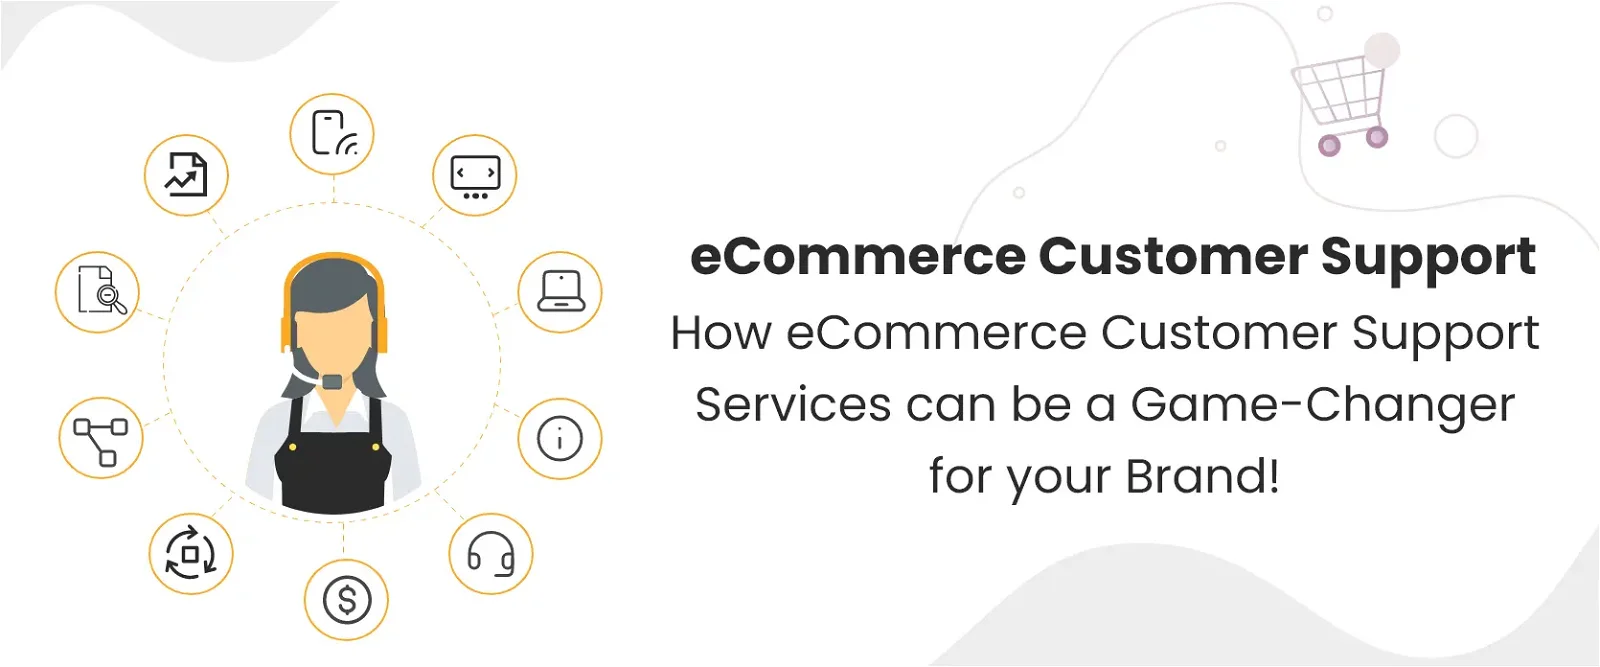 E-commerce Customer Support Services Can Be a Game-Changer for Your Brand